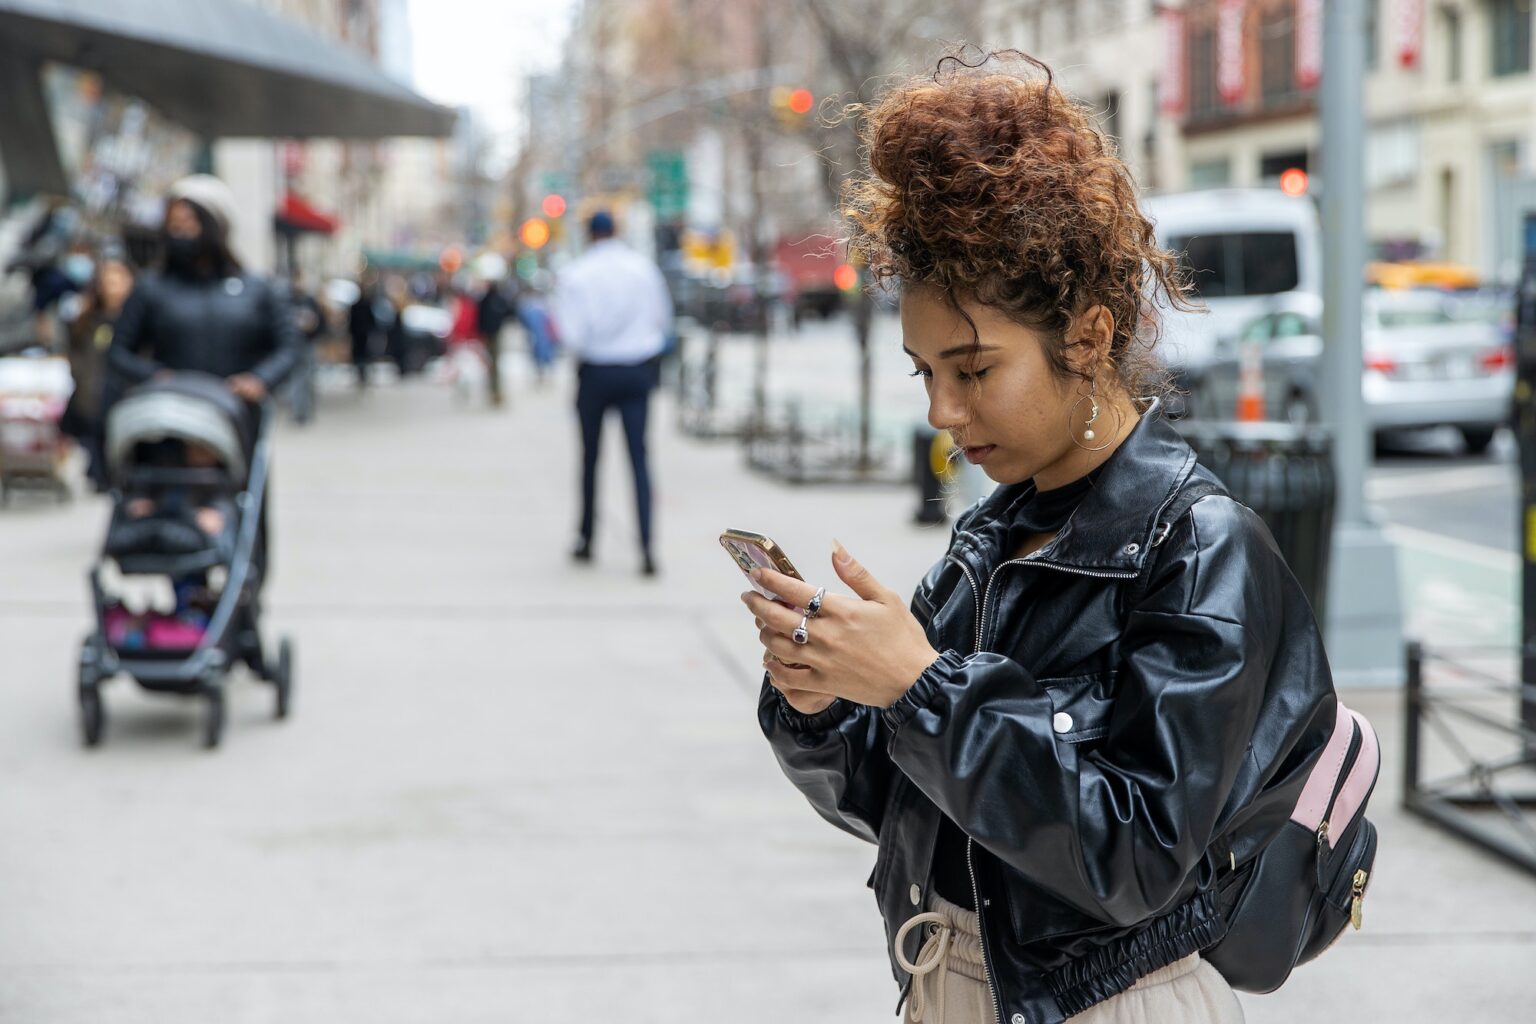 Woman wearing black leather jacket looks at phone.